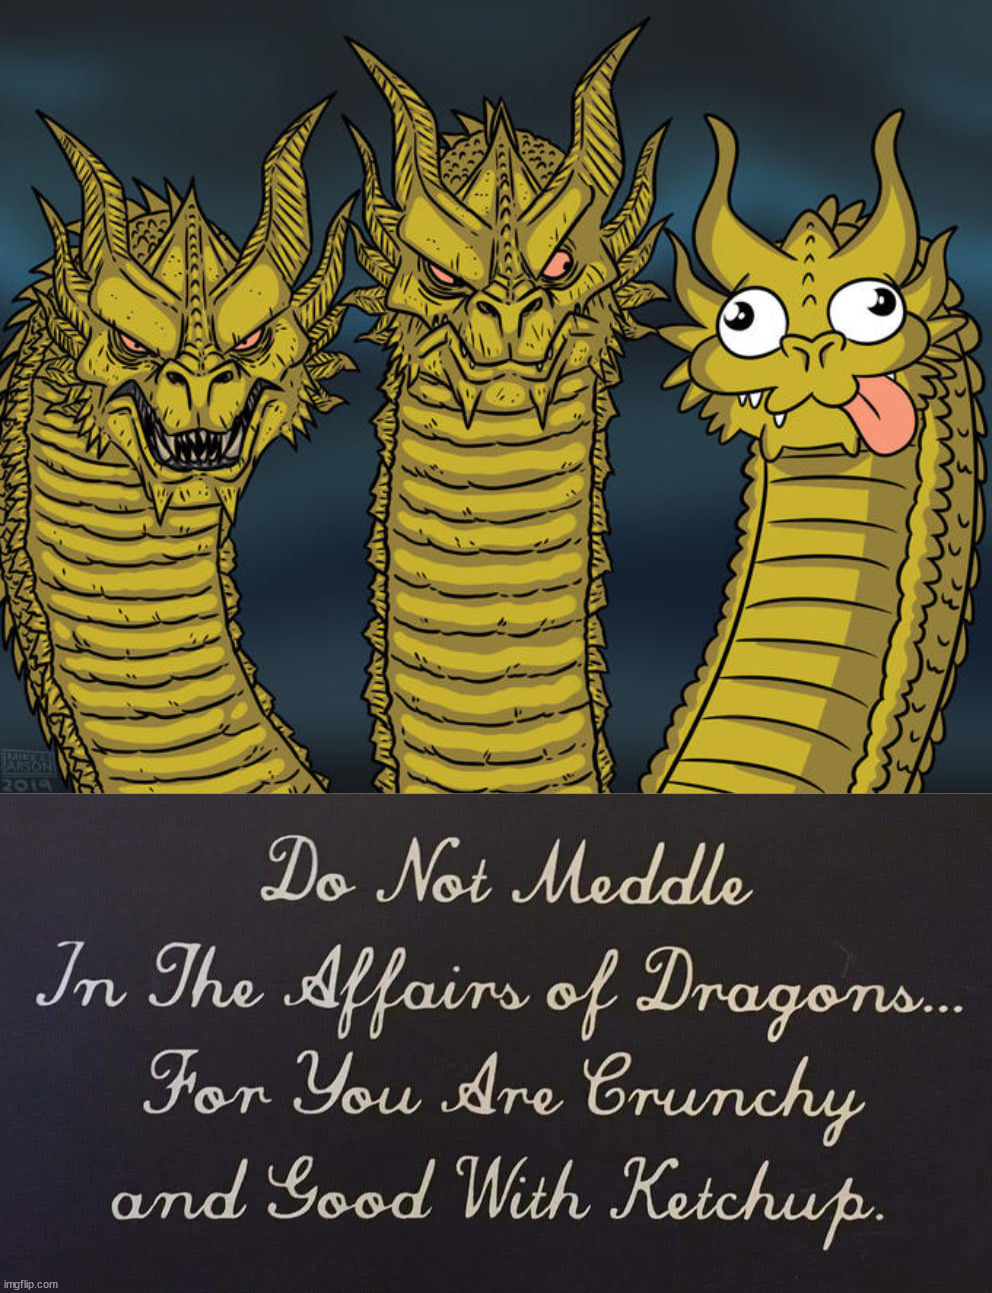 Image tagged in three-headed dragon - Imgflip